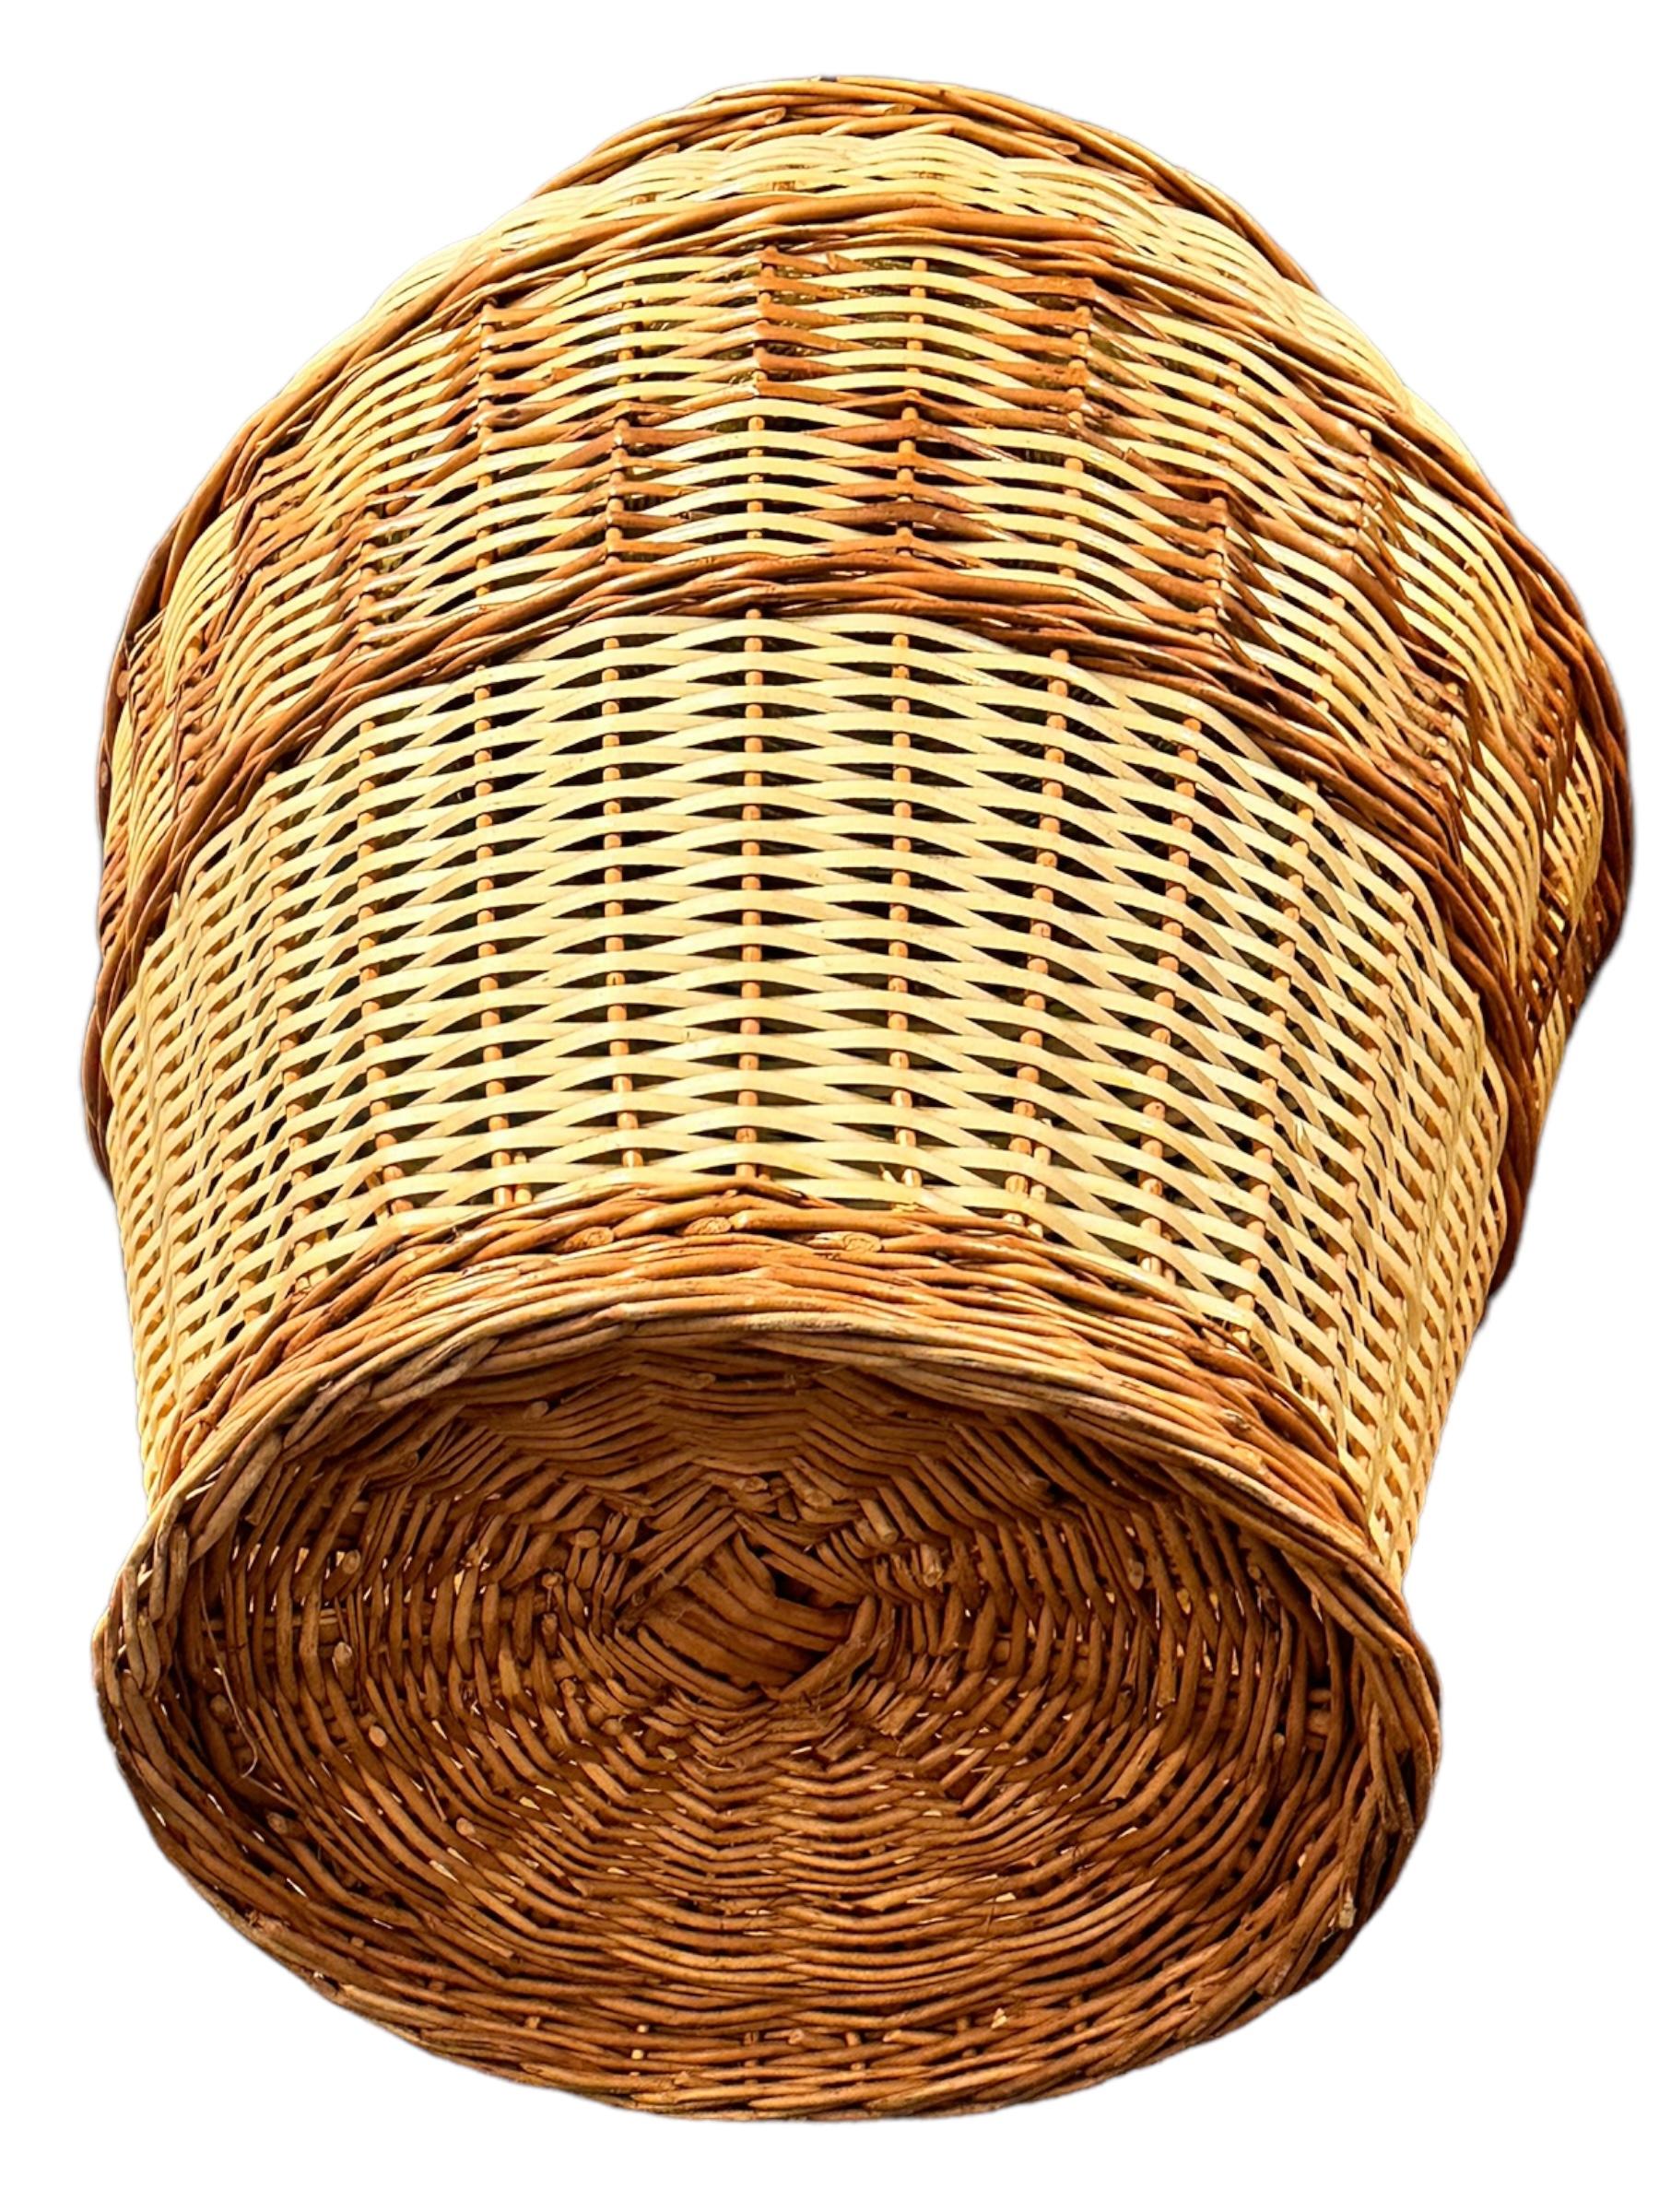 Late 20th Century Stunning Large Vintage Midcentury Wicker Laundry Basket Hamper, 1970s, Italy For Sale